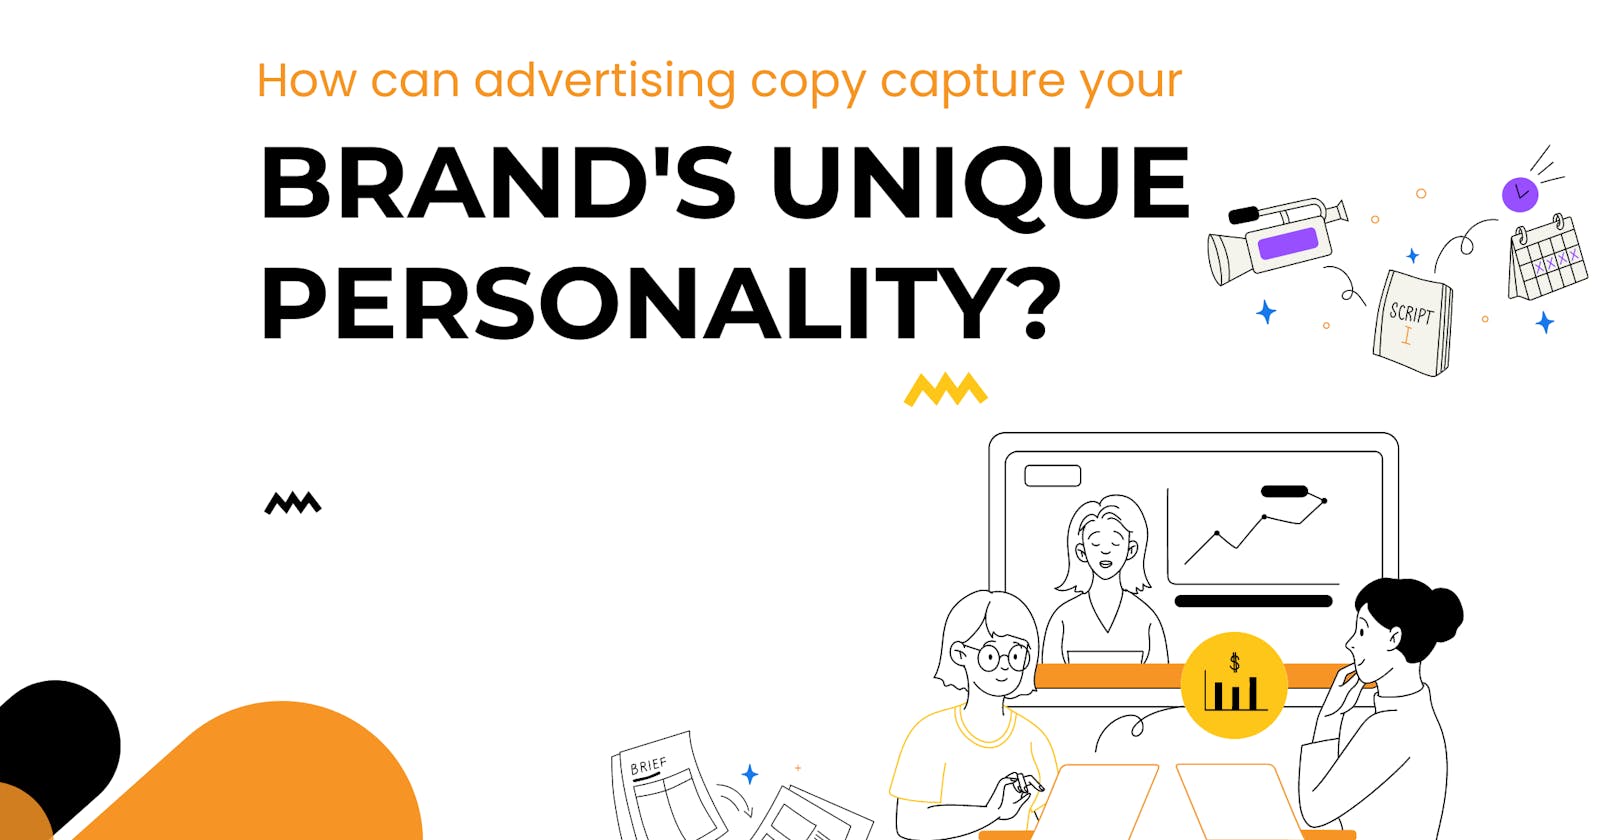 How can advertising copy capture your brand's unique personality?